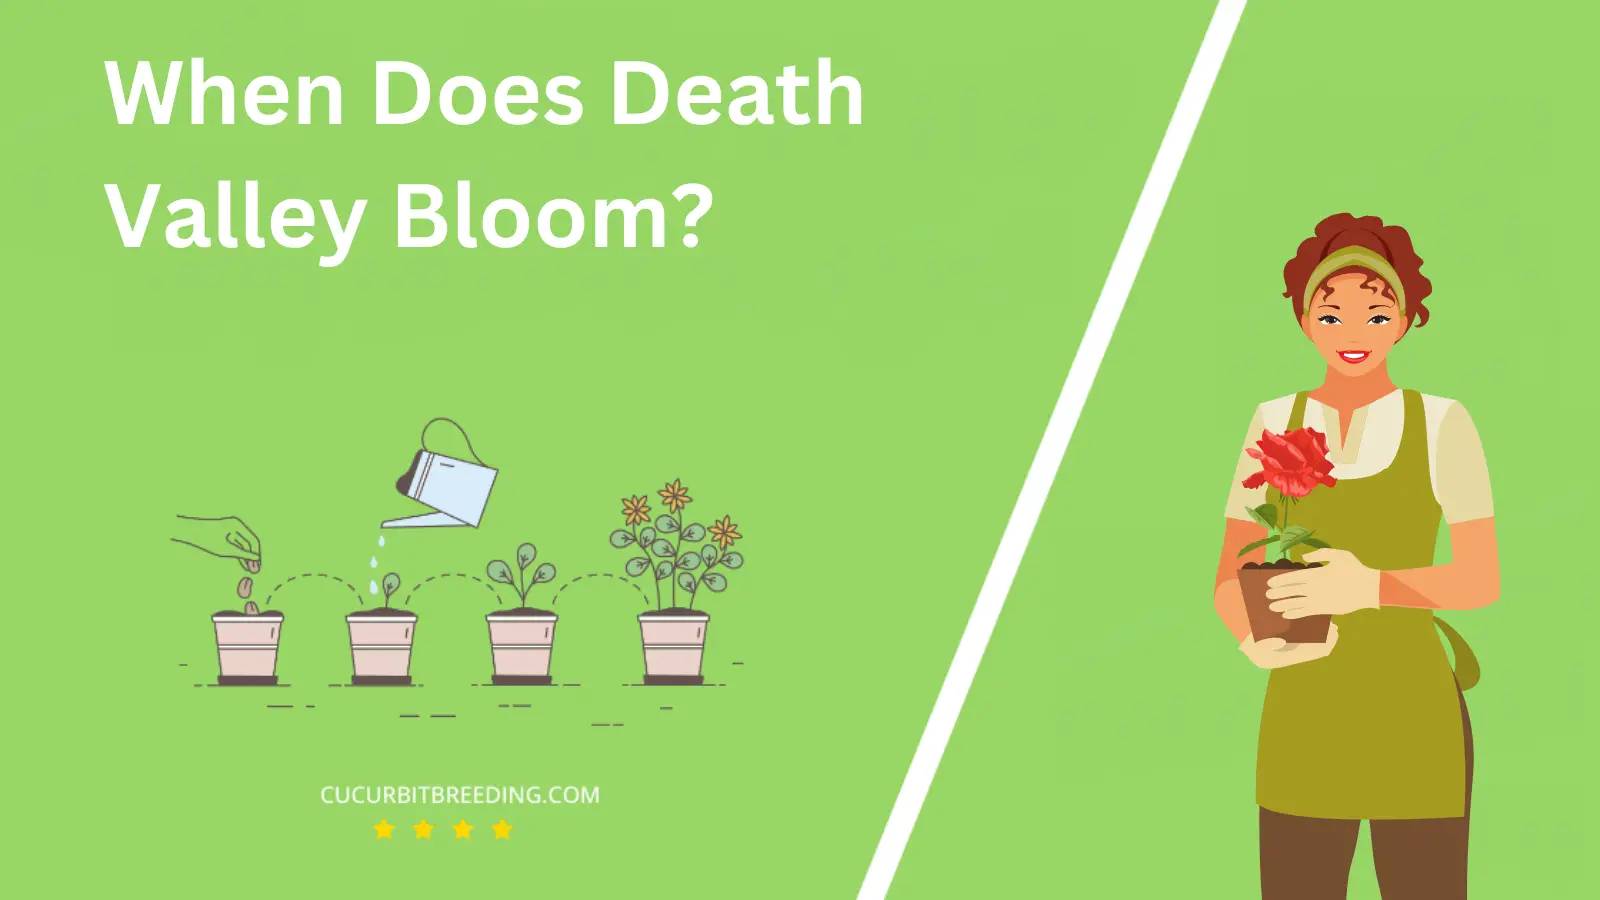 When Does Death Valley Bloom?